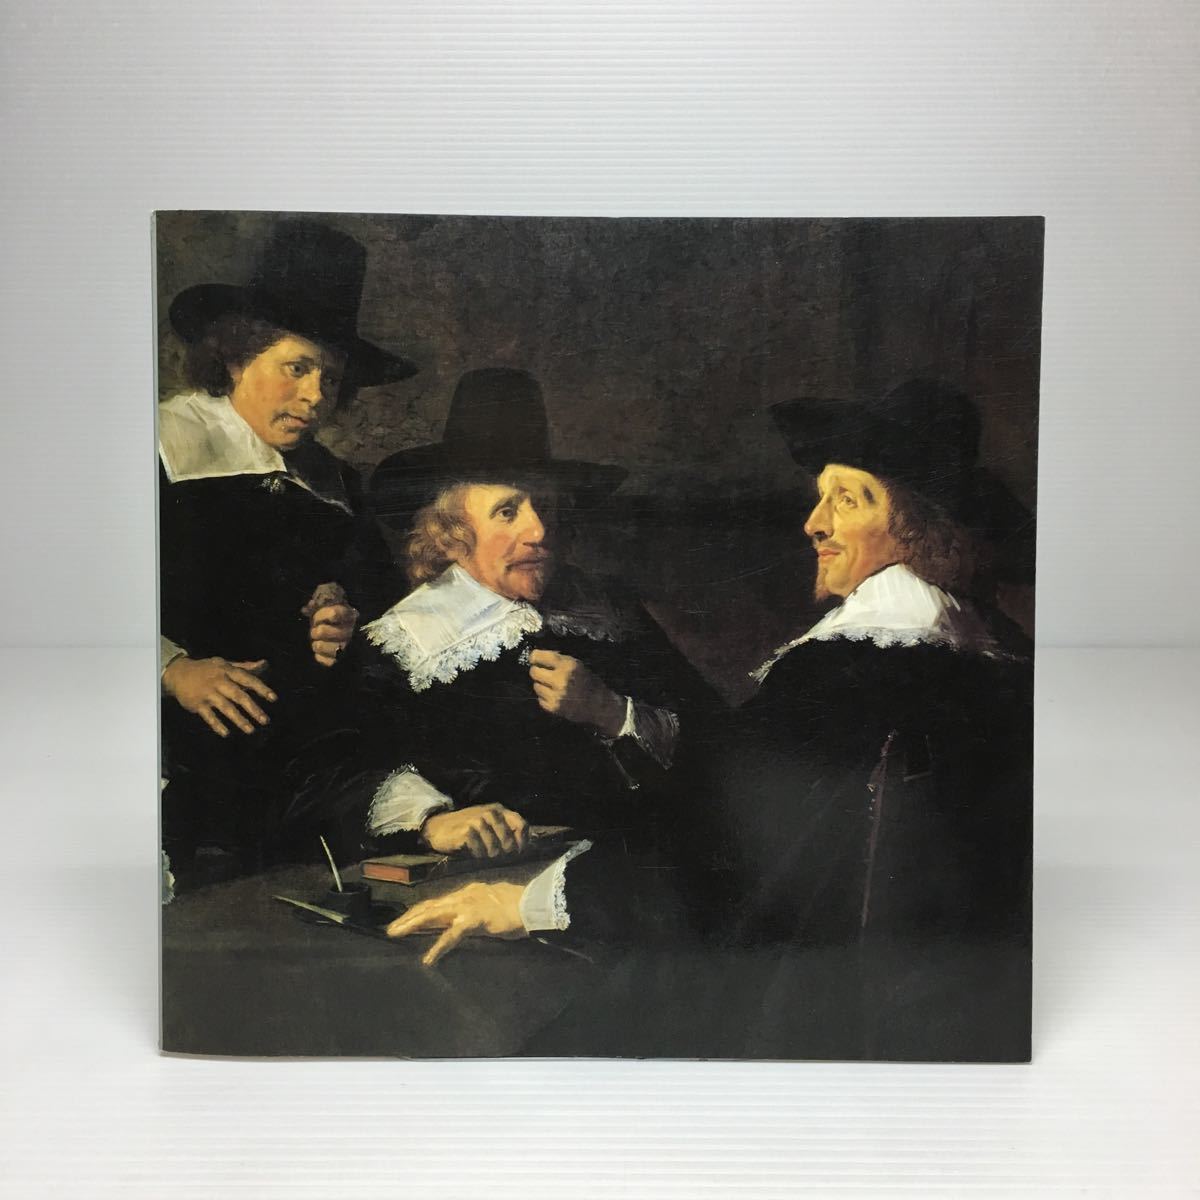 m2/Frans Hals and the Golden Ratio in 17th Century Dutch Painting FRANS HALS & HAARLEM PAINTERS 1988, Painting, Art Book, Collection, Catalog